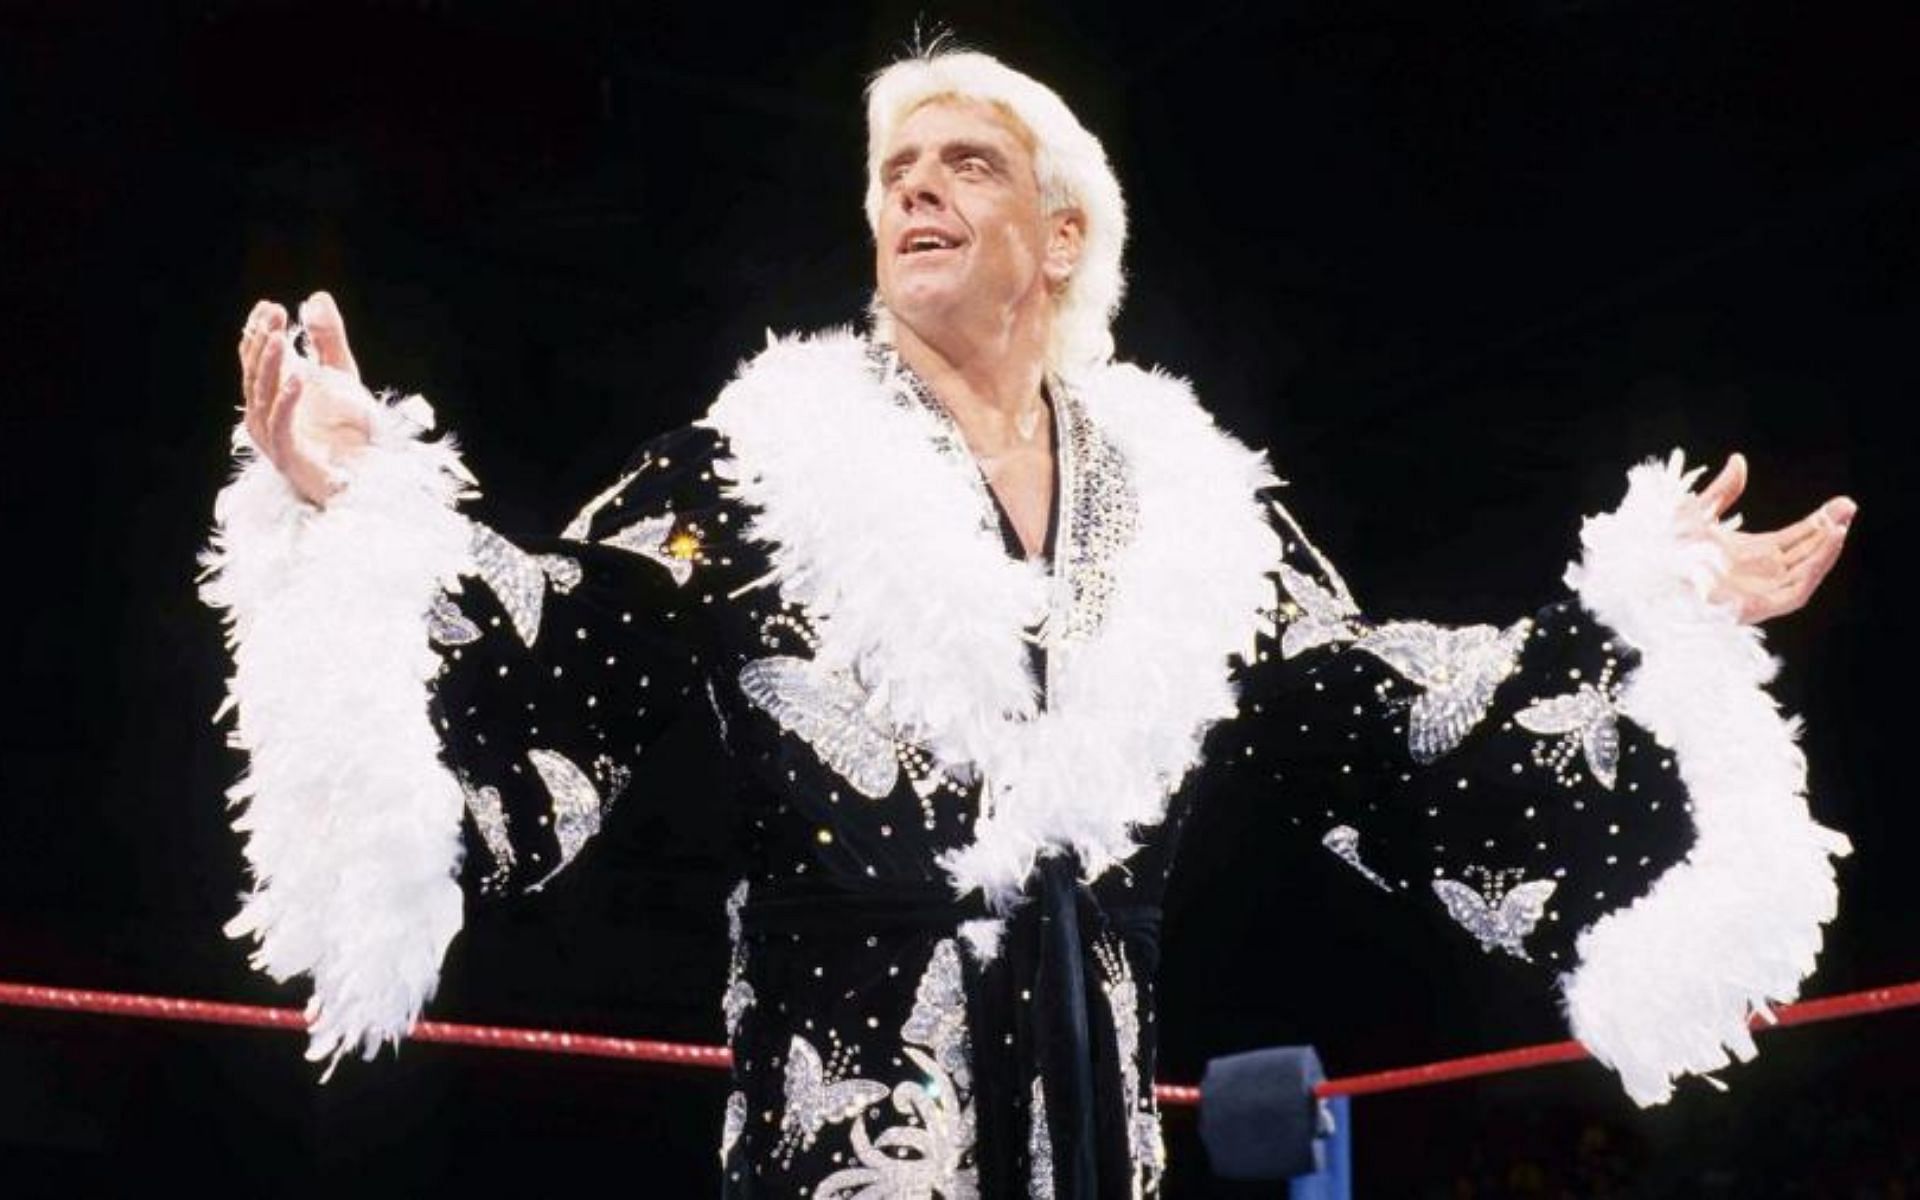 Ric Flair will step into the ring for one last match